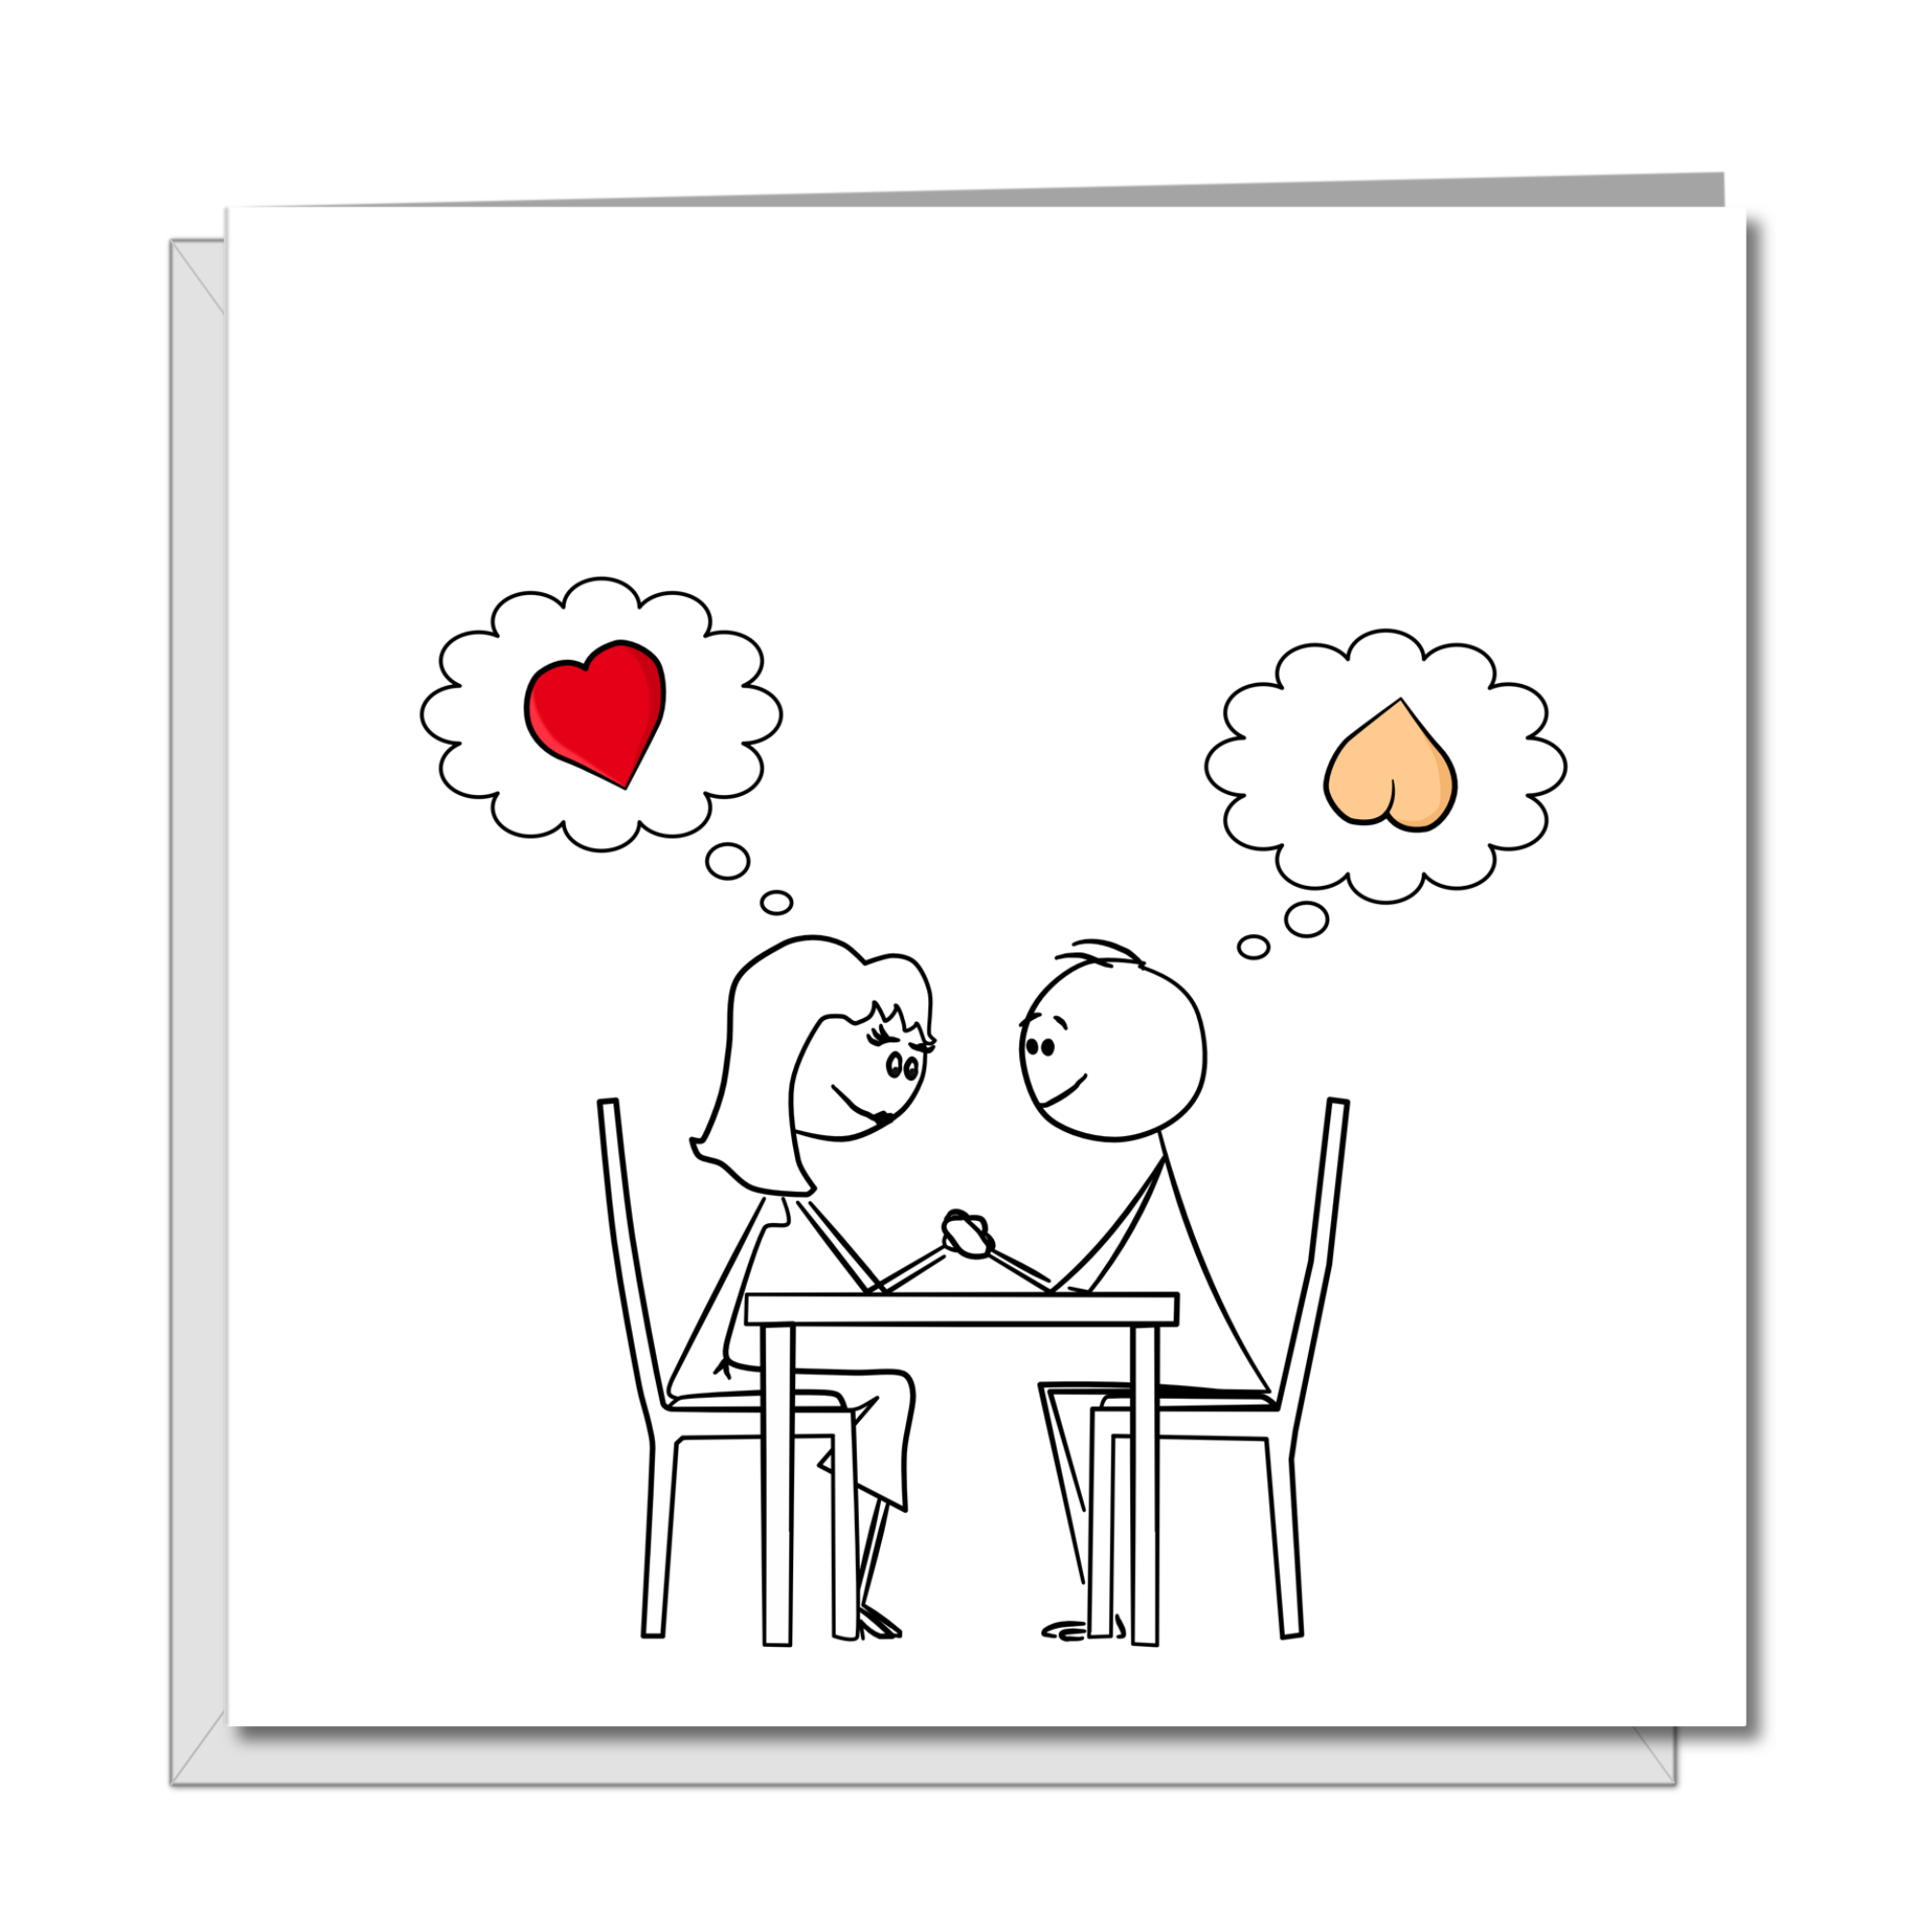 Naughty Card for Boyfriend or Girlfriend. Valentines Day Card, Anniversary Card, Birthday Card. Love cartoon, funny, humorous, rude, adult